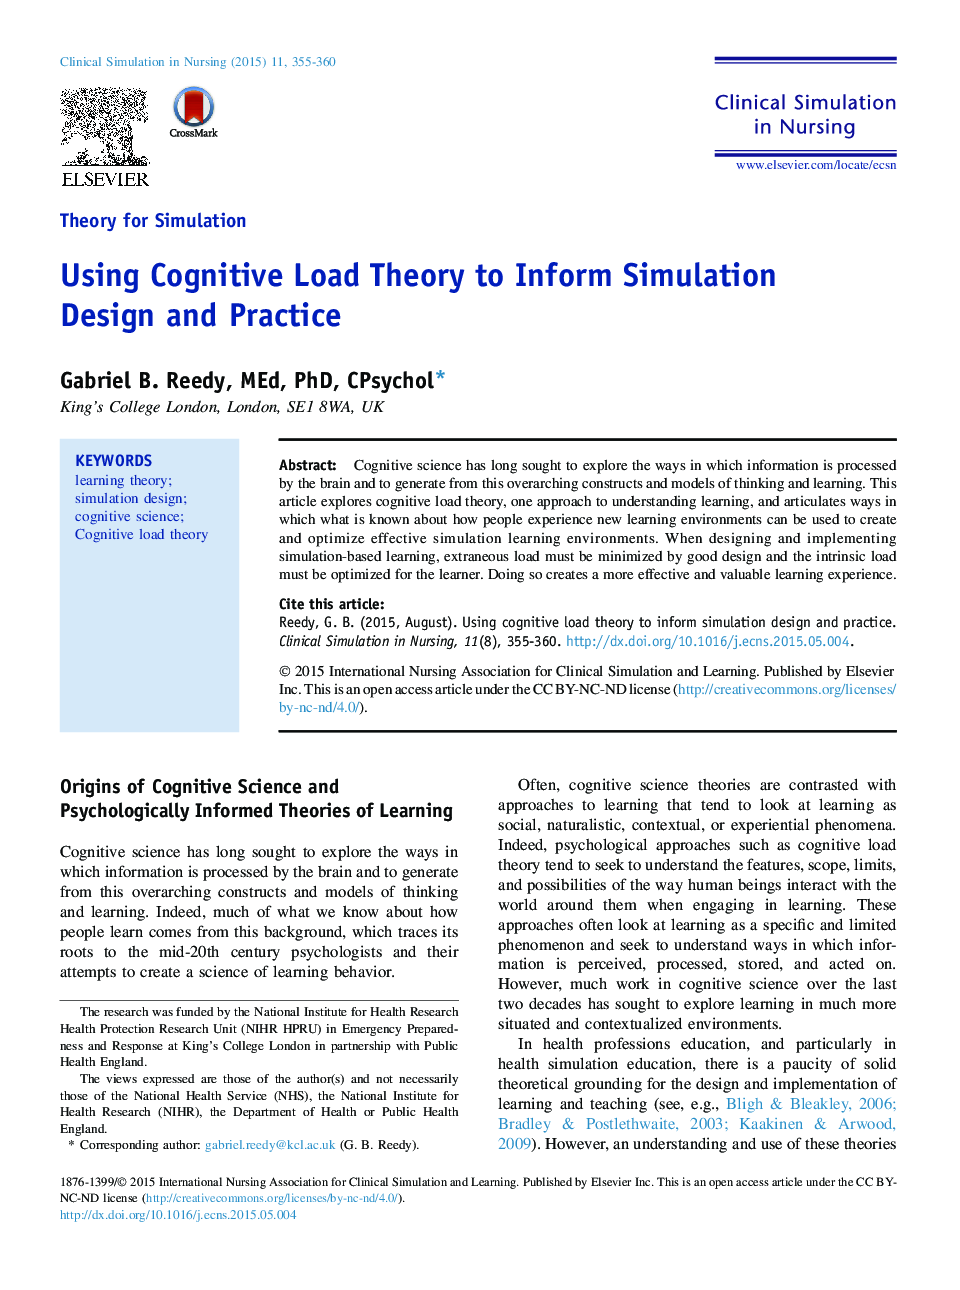 Using Cognitive Load Theory to Inform Simulation Design and Practice